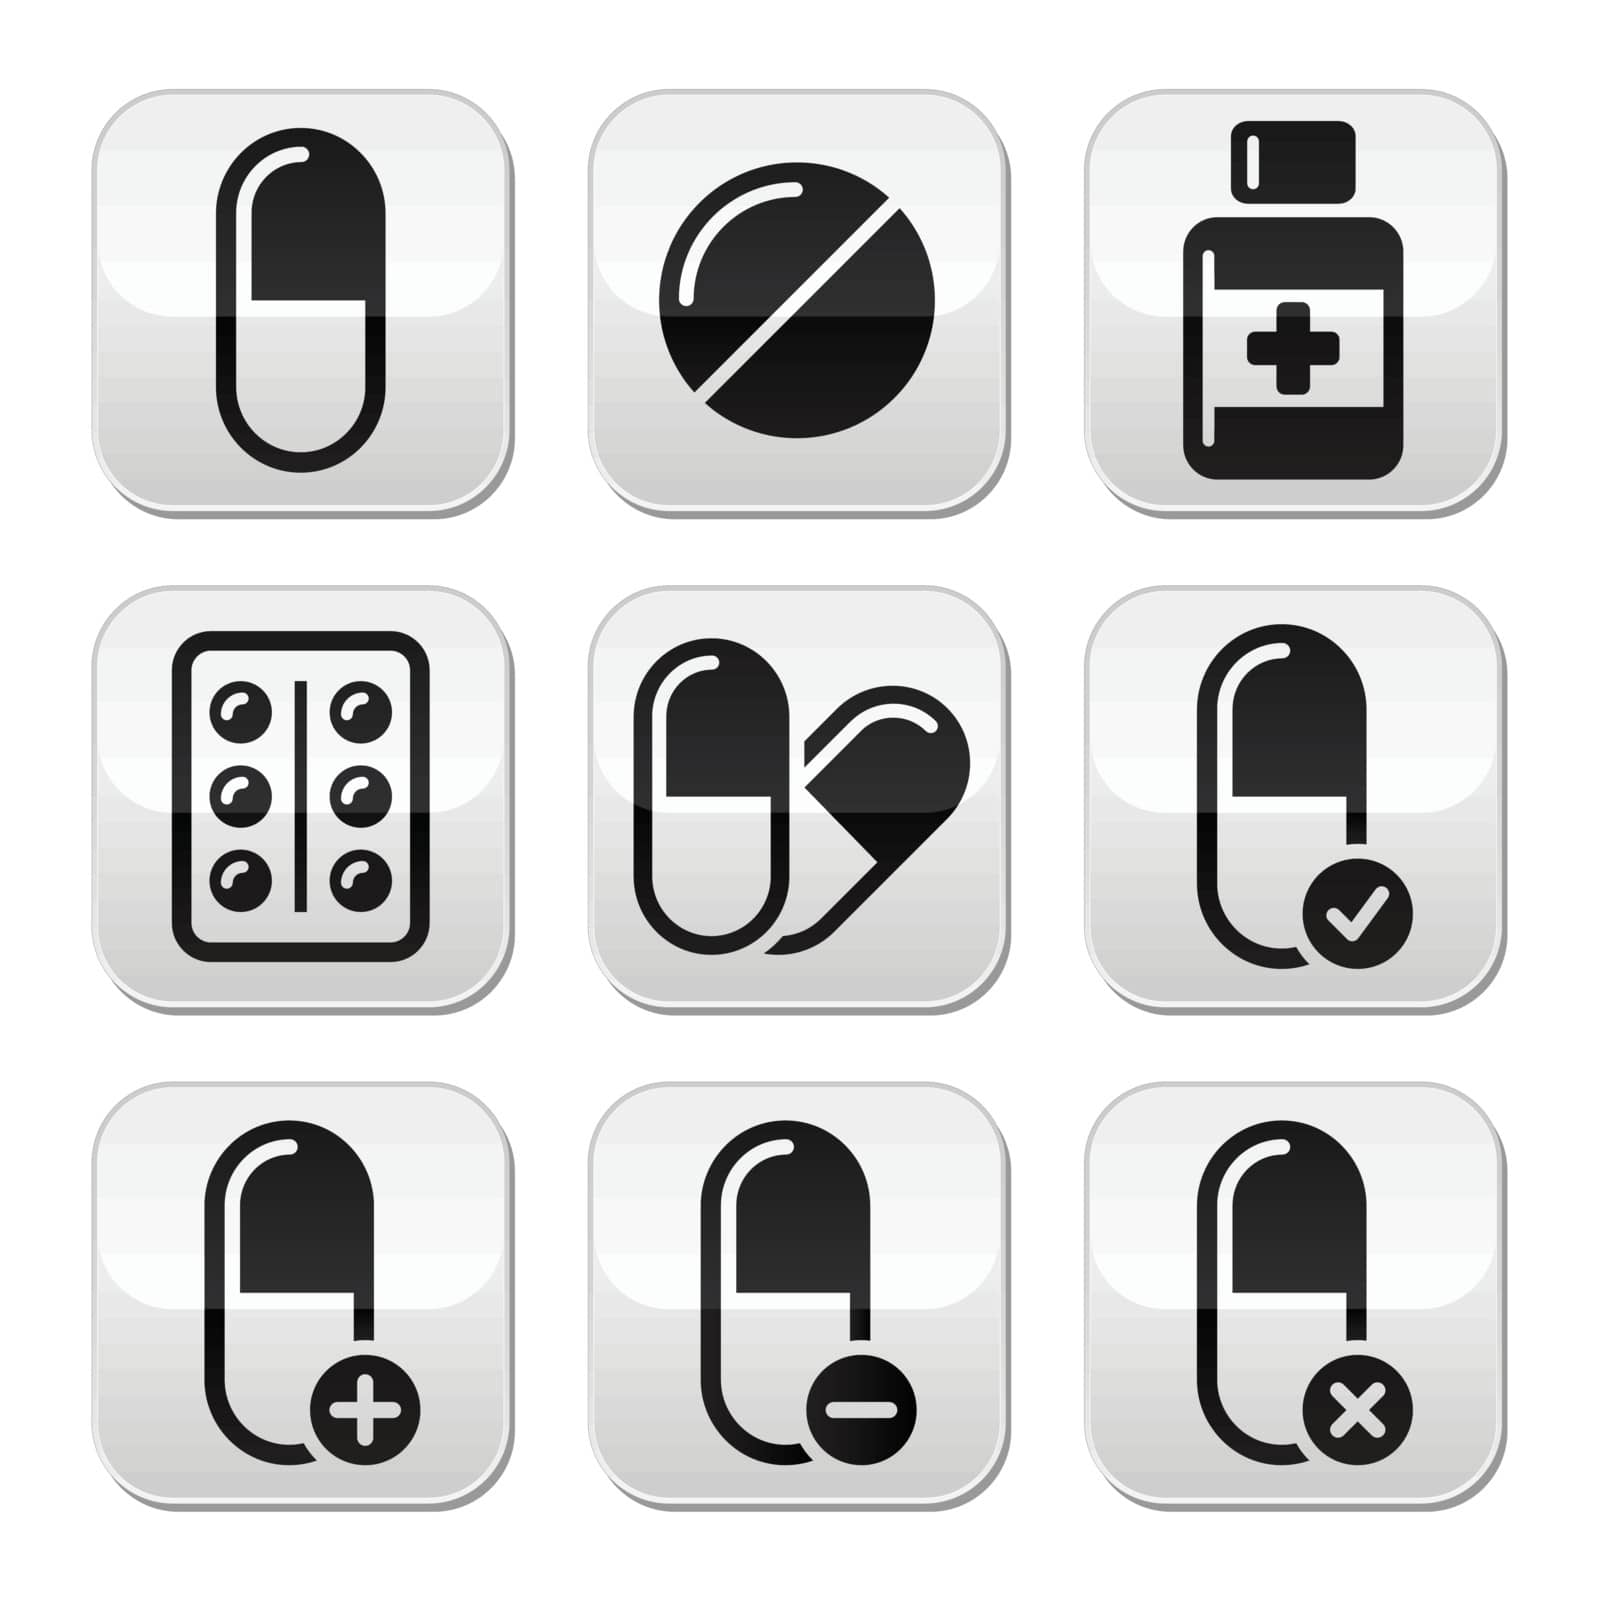 Modern grey square buttons isolated on white - health, medicine, pills, addiction